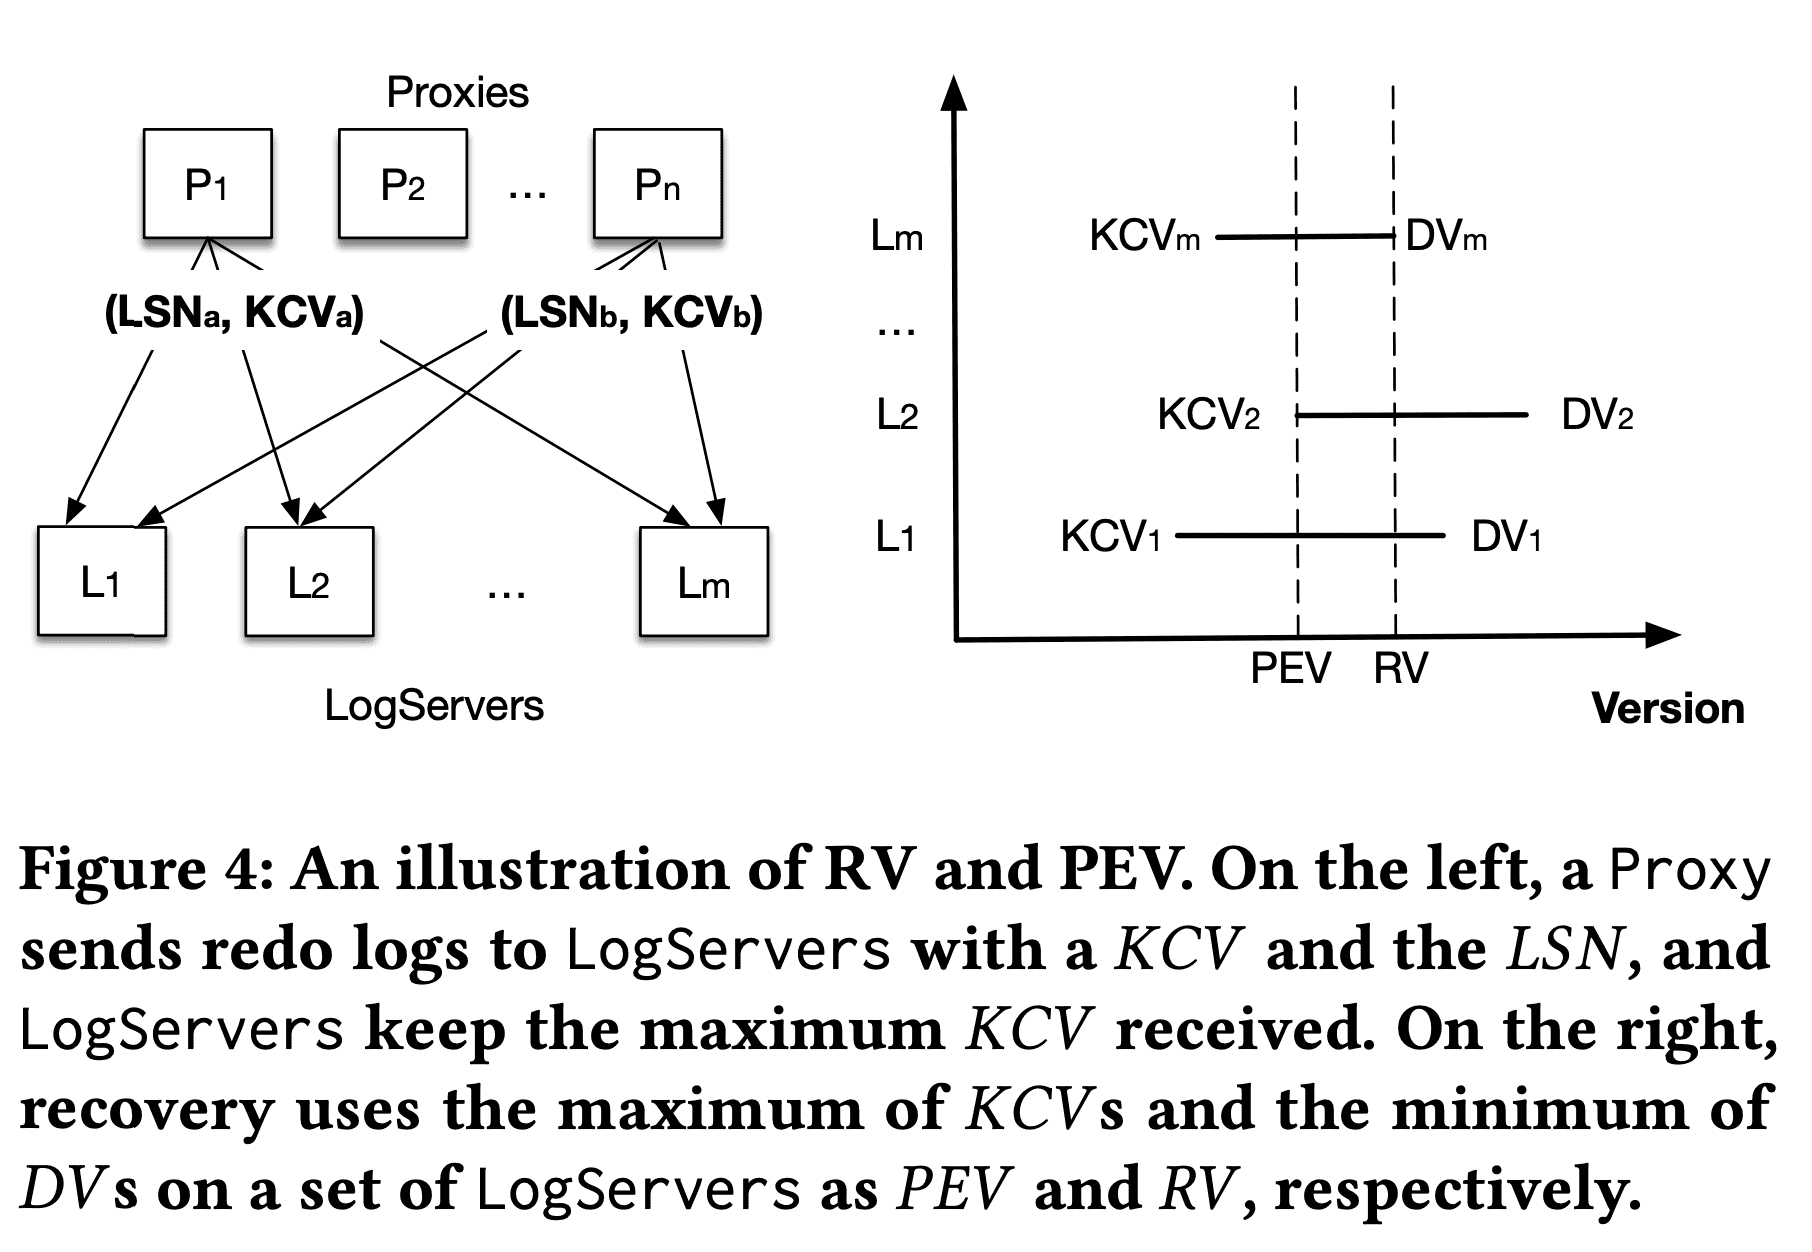 An illustration of RV and PEV. On the left, a Proxy sends redo logs to LogServers with a 𝐾𝐶𝑉 and the 𝐿𝑆𝑁, and LogServers keep the maximum 𝐾𝐶𝑉 received. On the right, recovery uses the maximum of 𝐾𝐶𝑉 s and the minimum of 𝐷𝑉 s on a set of LogServers as 𝑃𝐸𝑉 and 𝑅𝑉 , respectively